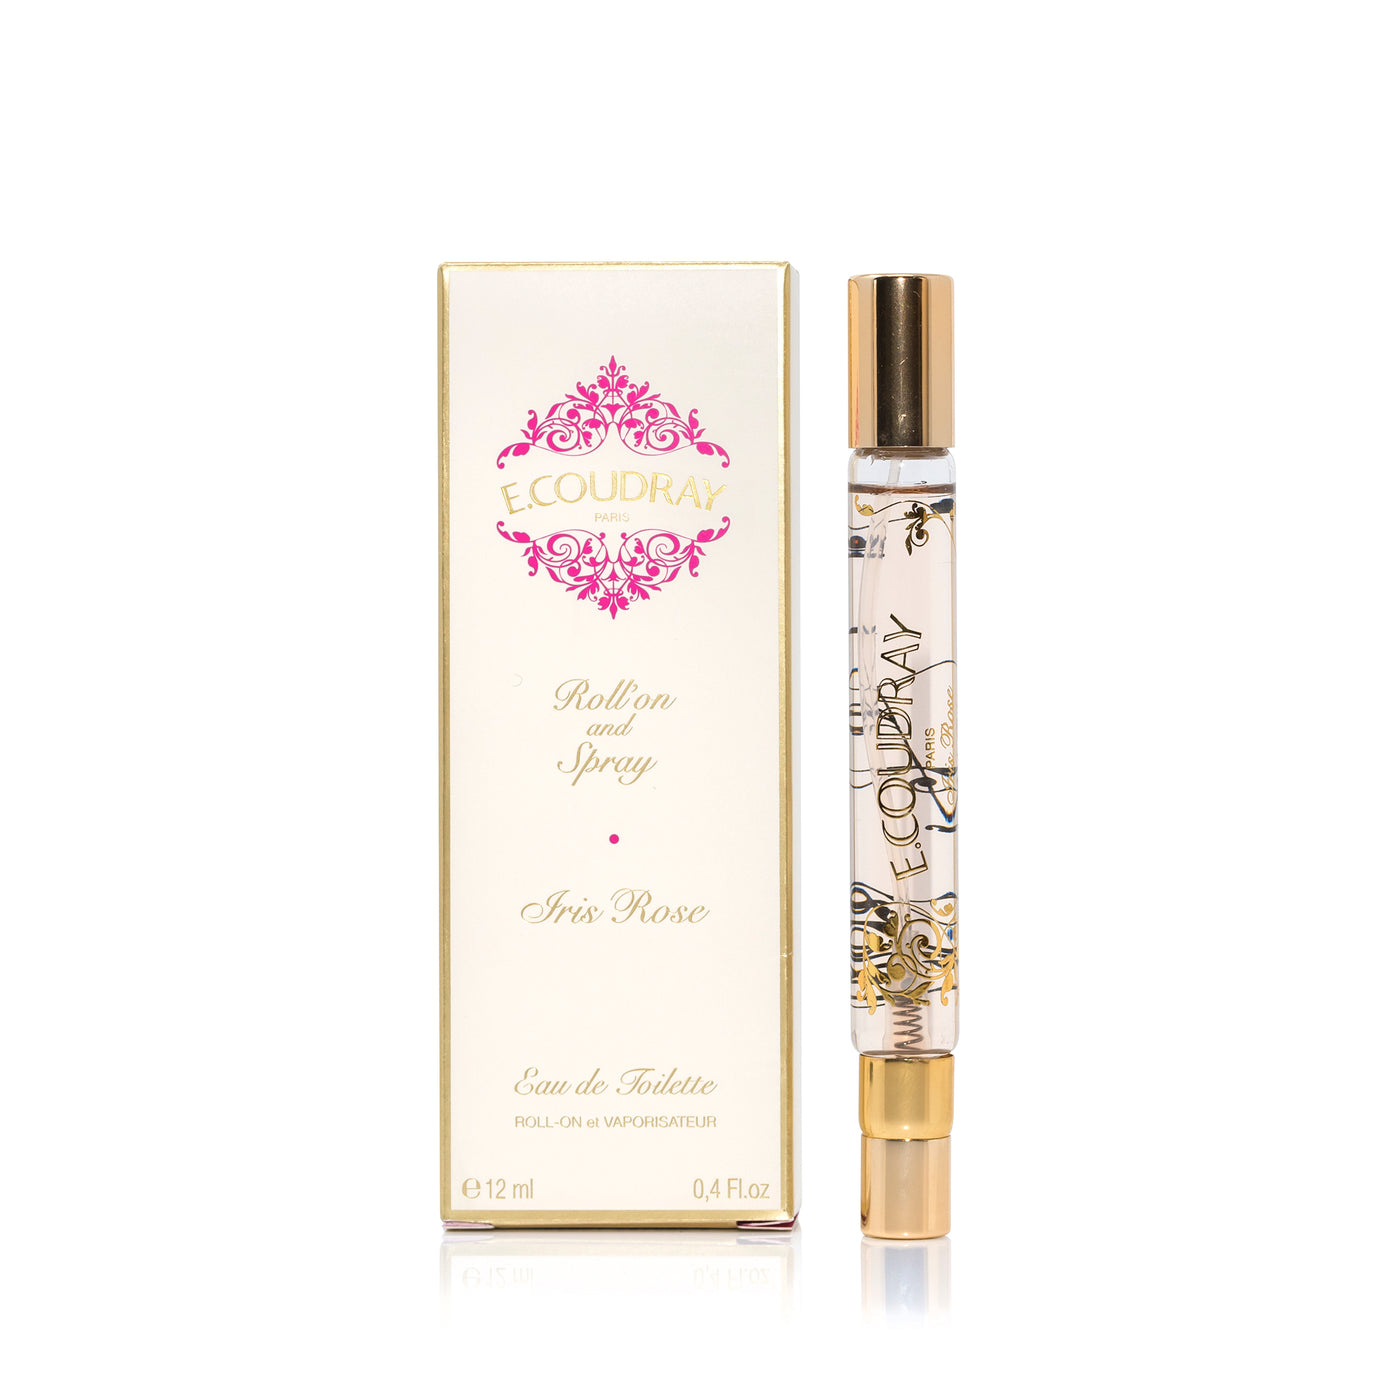 E.Coudray Iris Rose EDT 12ml Roll On